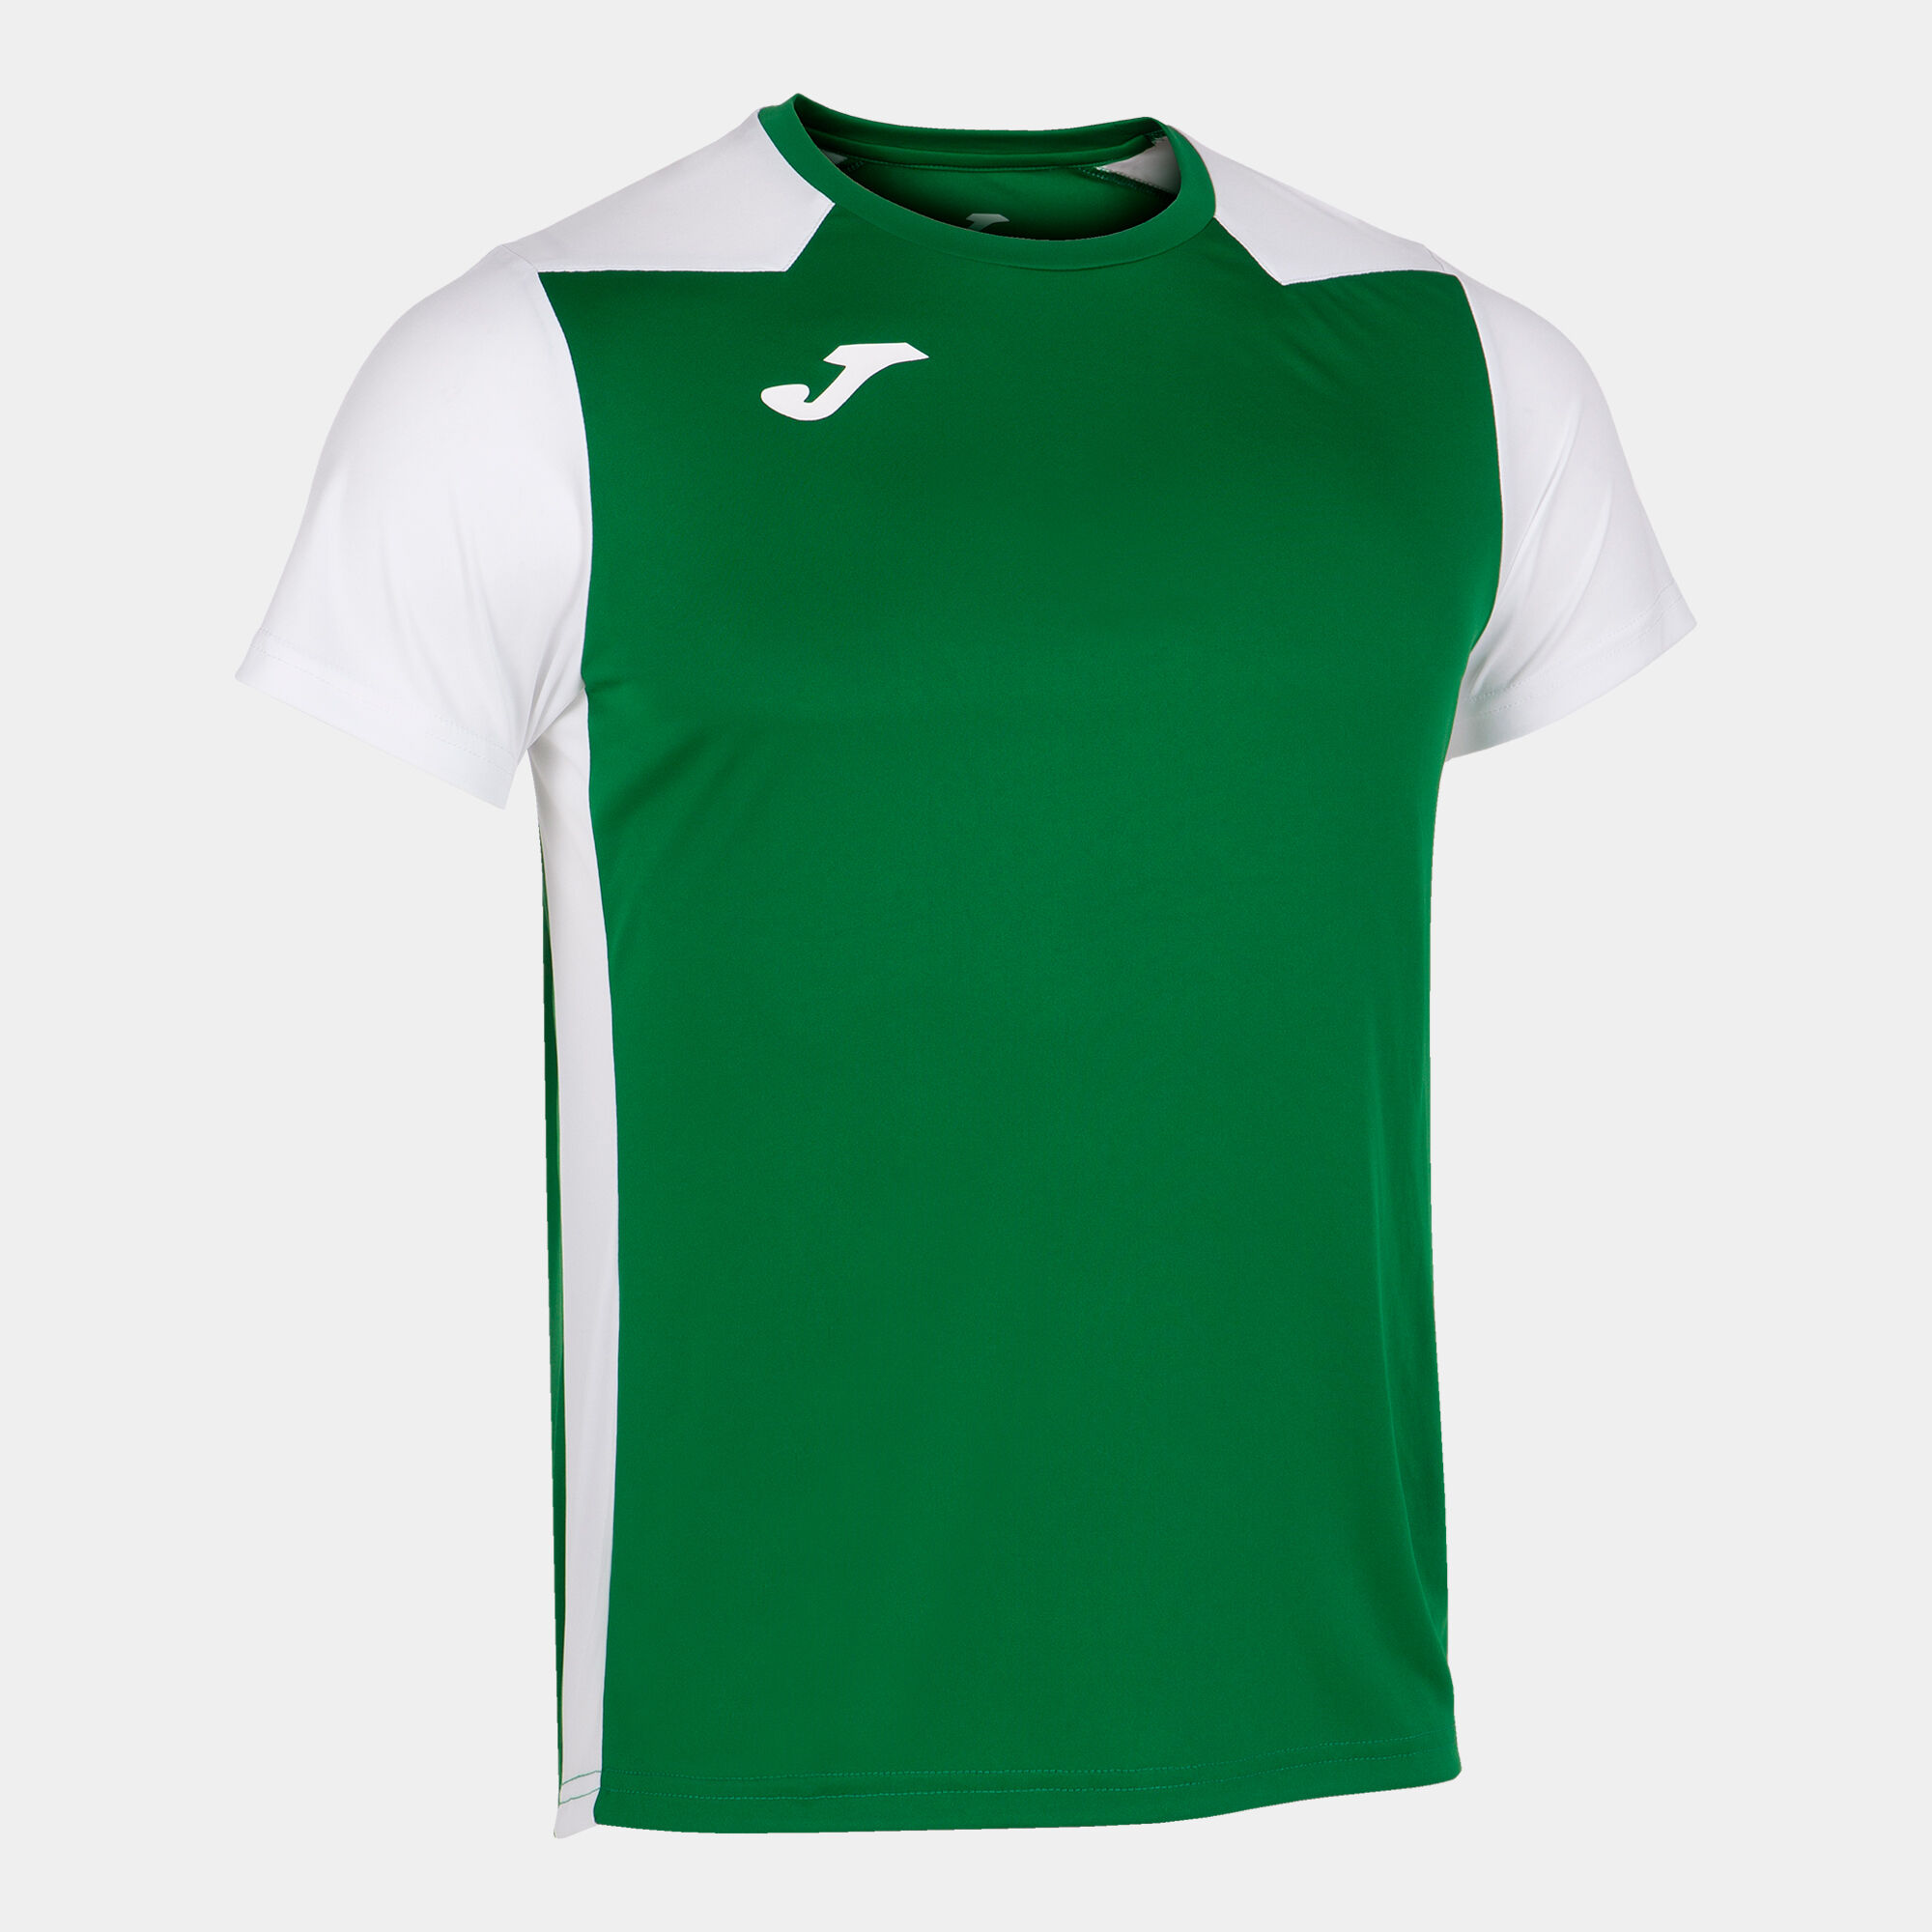 MAILLOT MANCHES COURTES HOMME RECORD II VERT BLANC